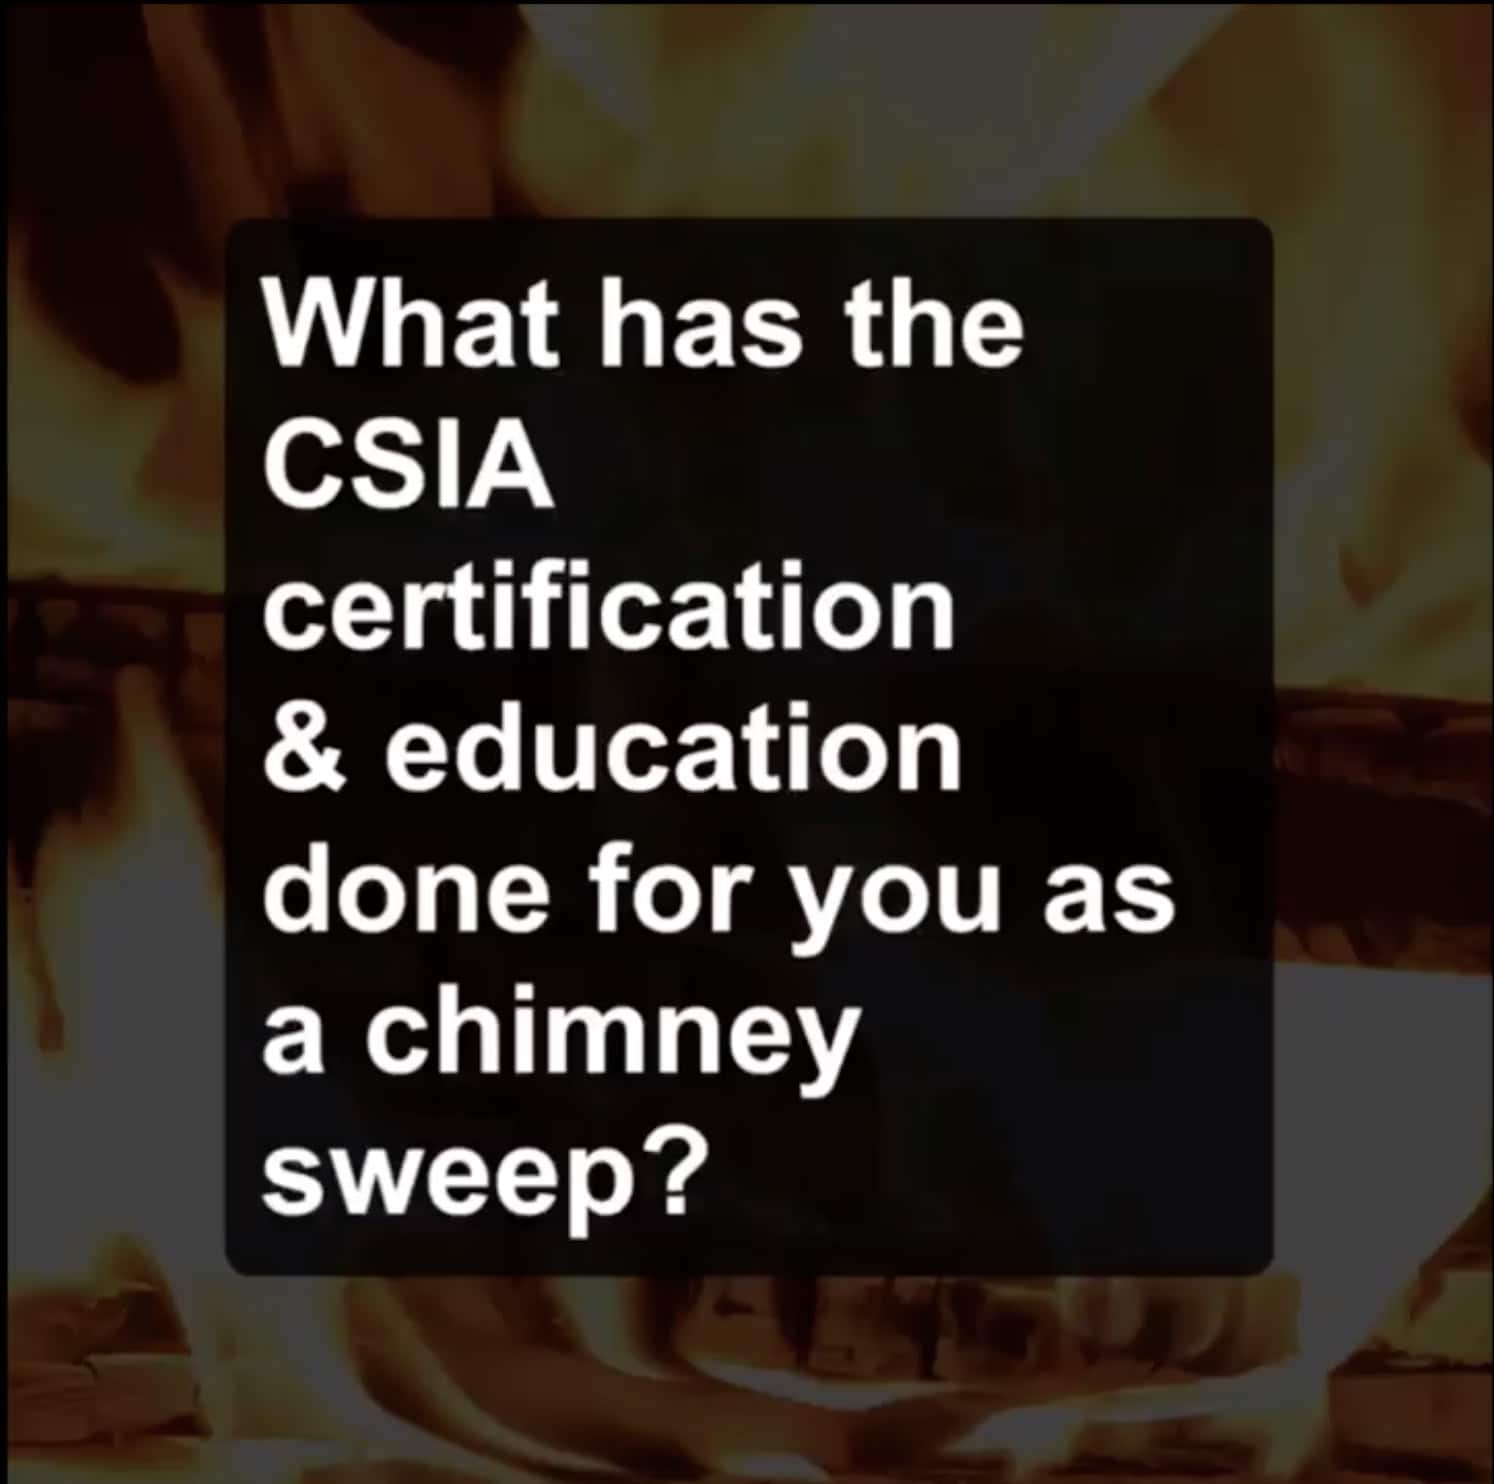 What has the CSIA certification & education done for you as a chimney sweep?